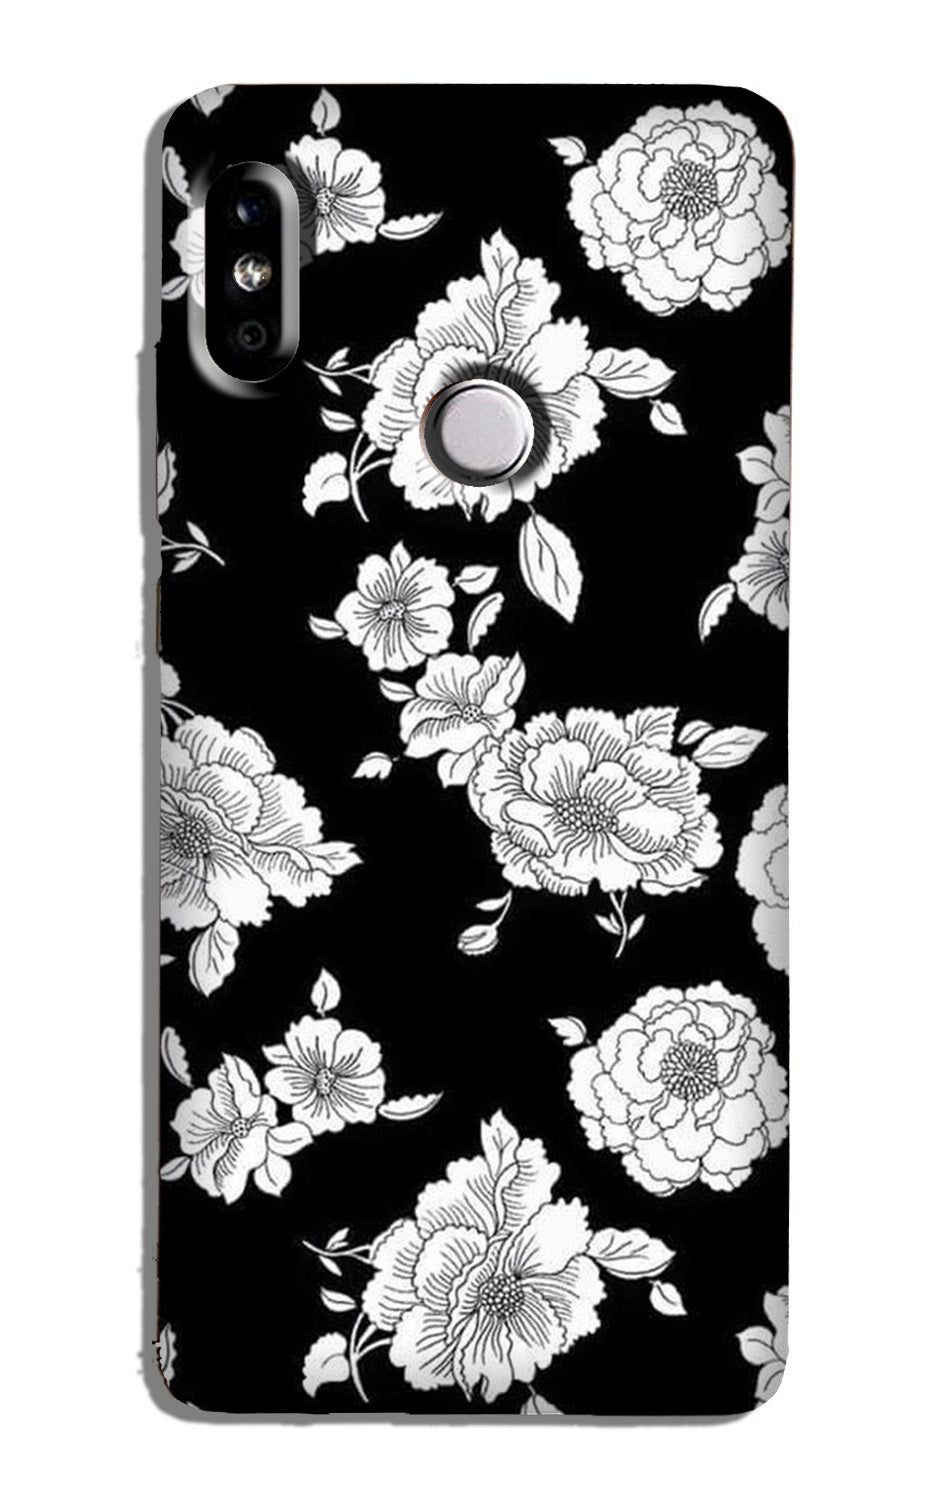 White flowers Black Background Case for Mi A2